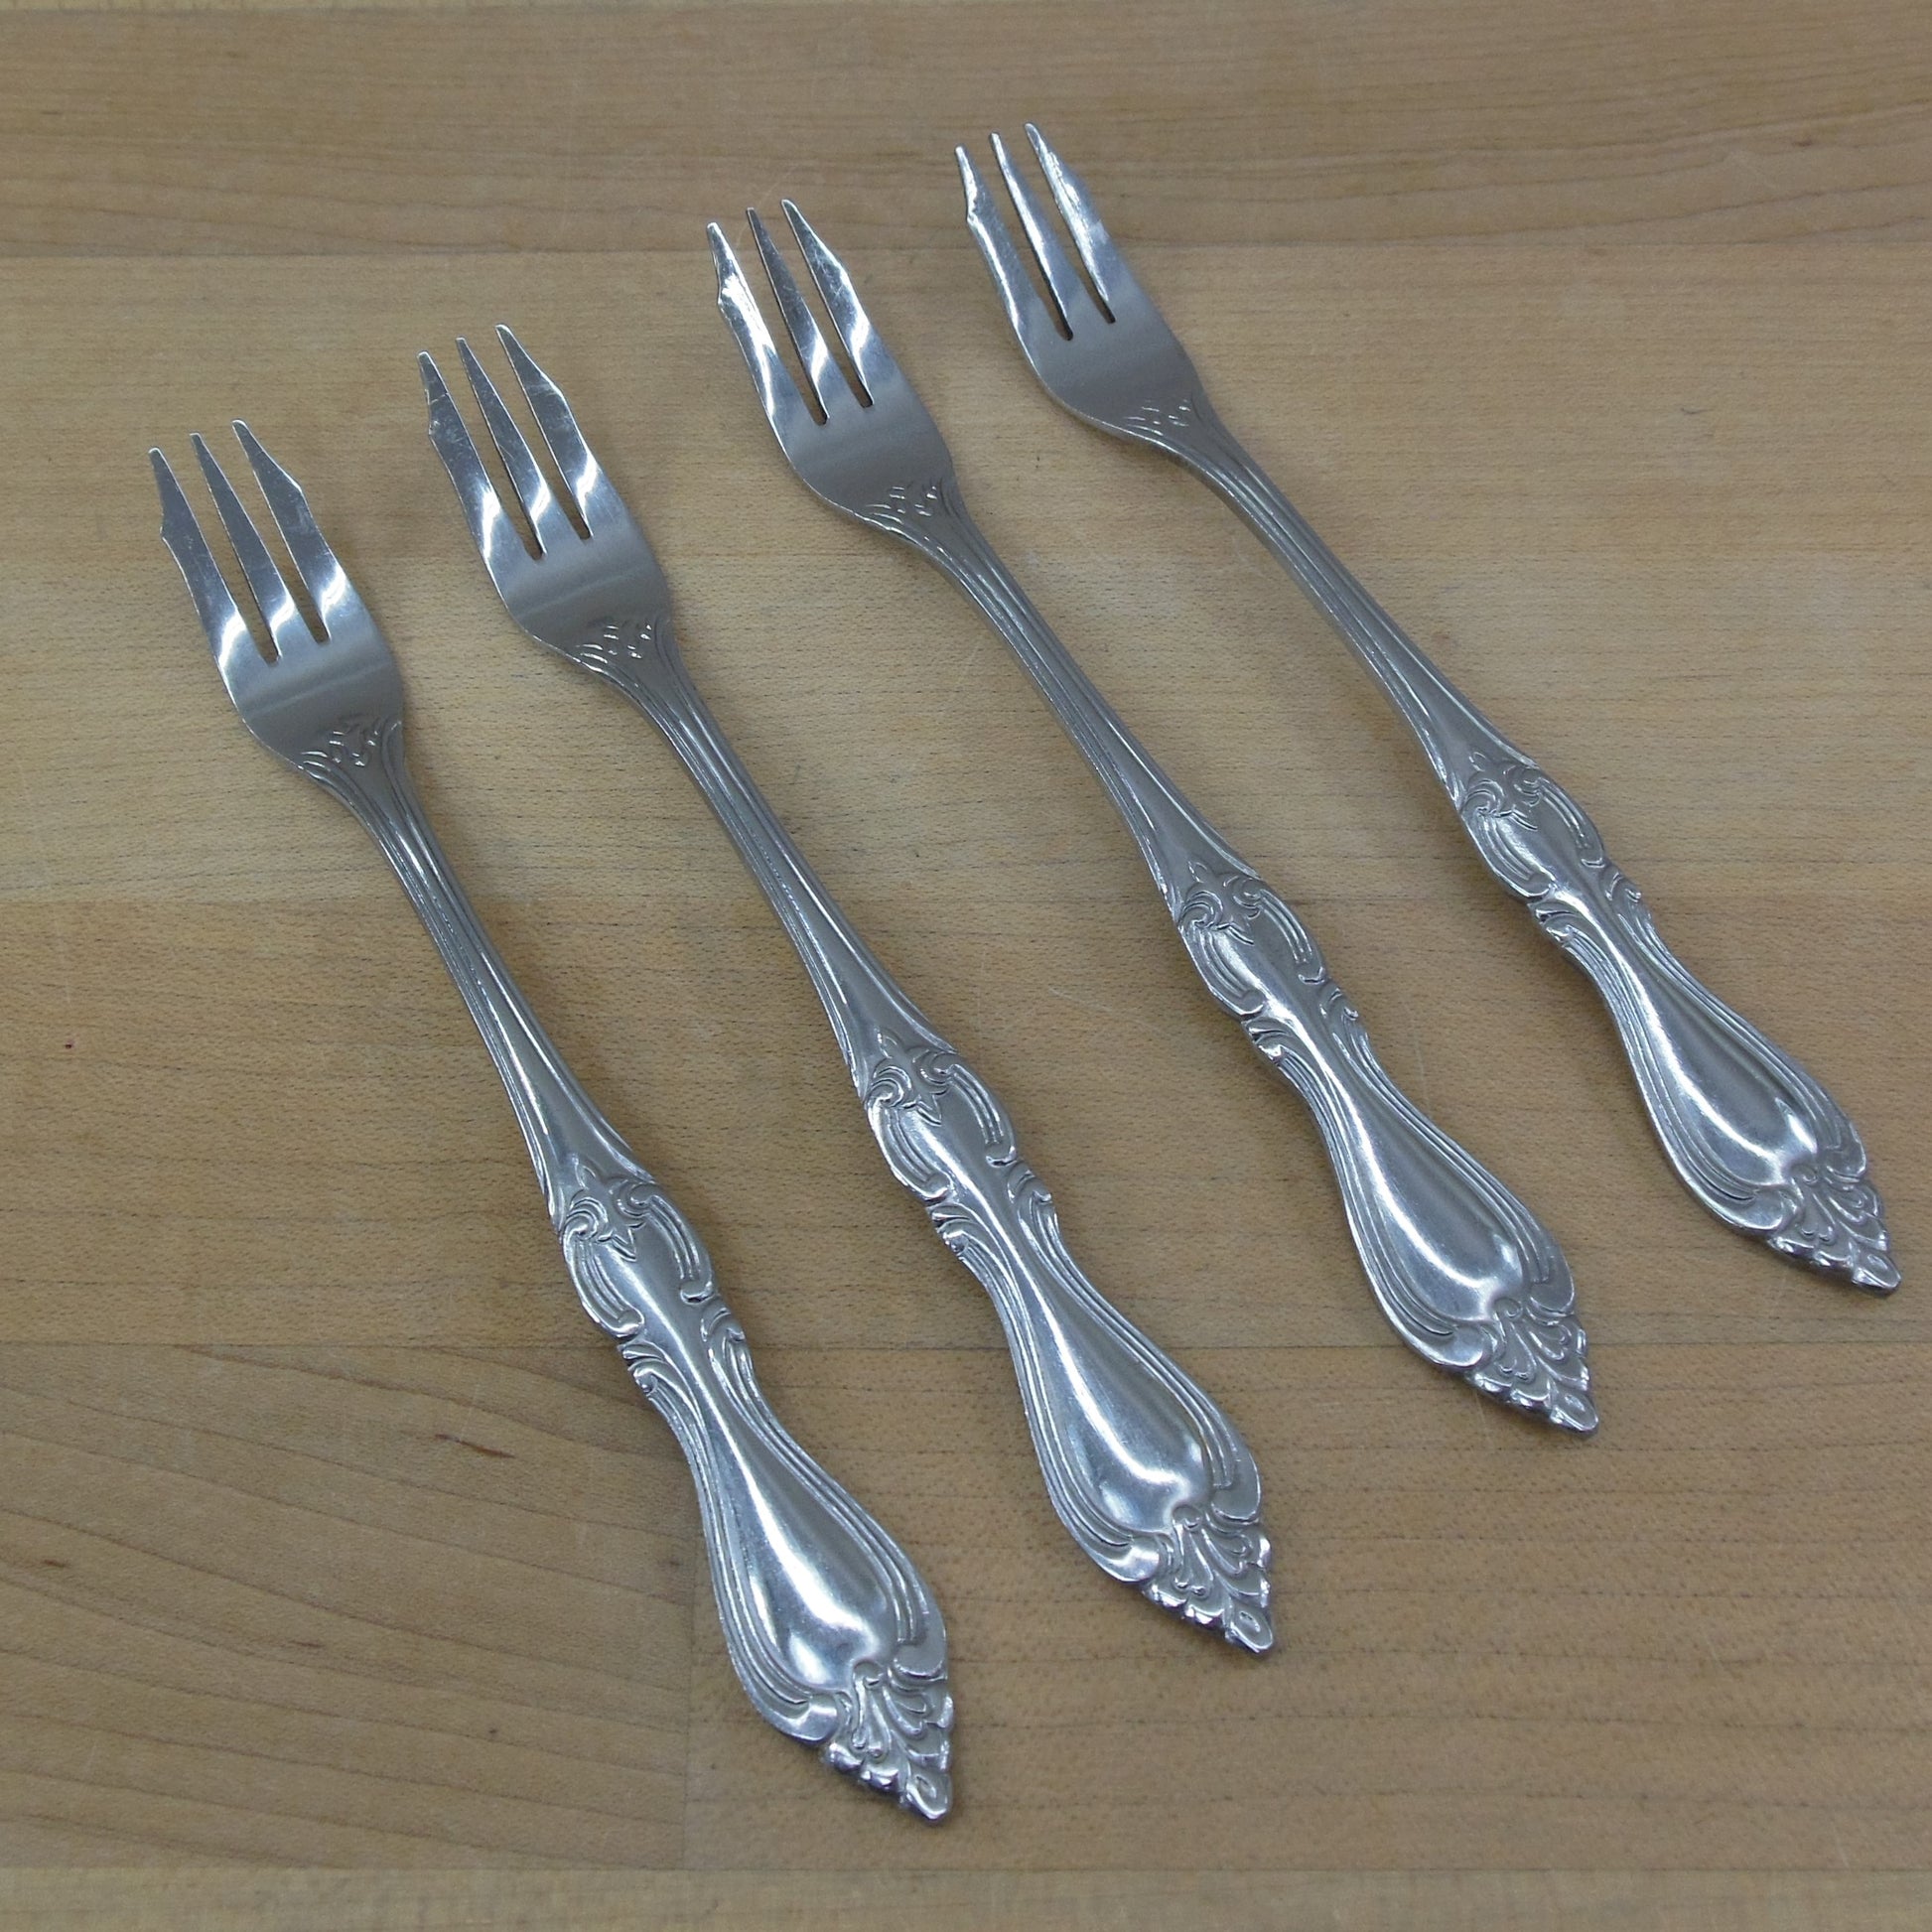 Towle Supreme Cutlery TWS70 NOS Cocktail Seafood Forks - 4 Set New